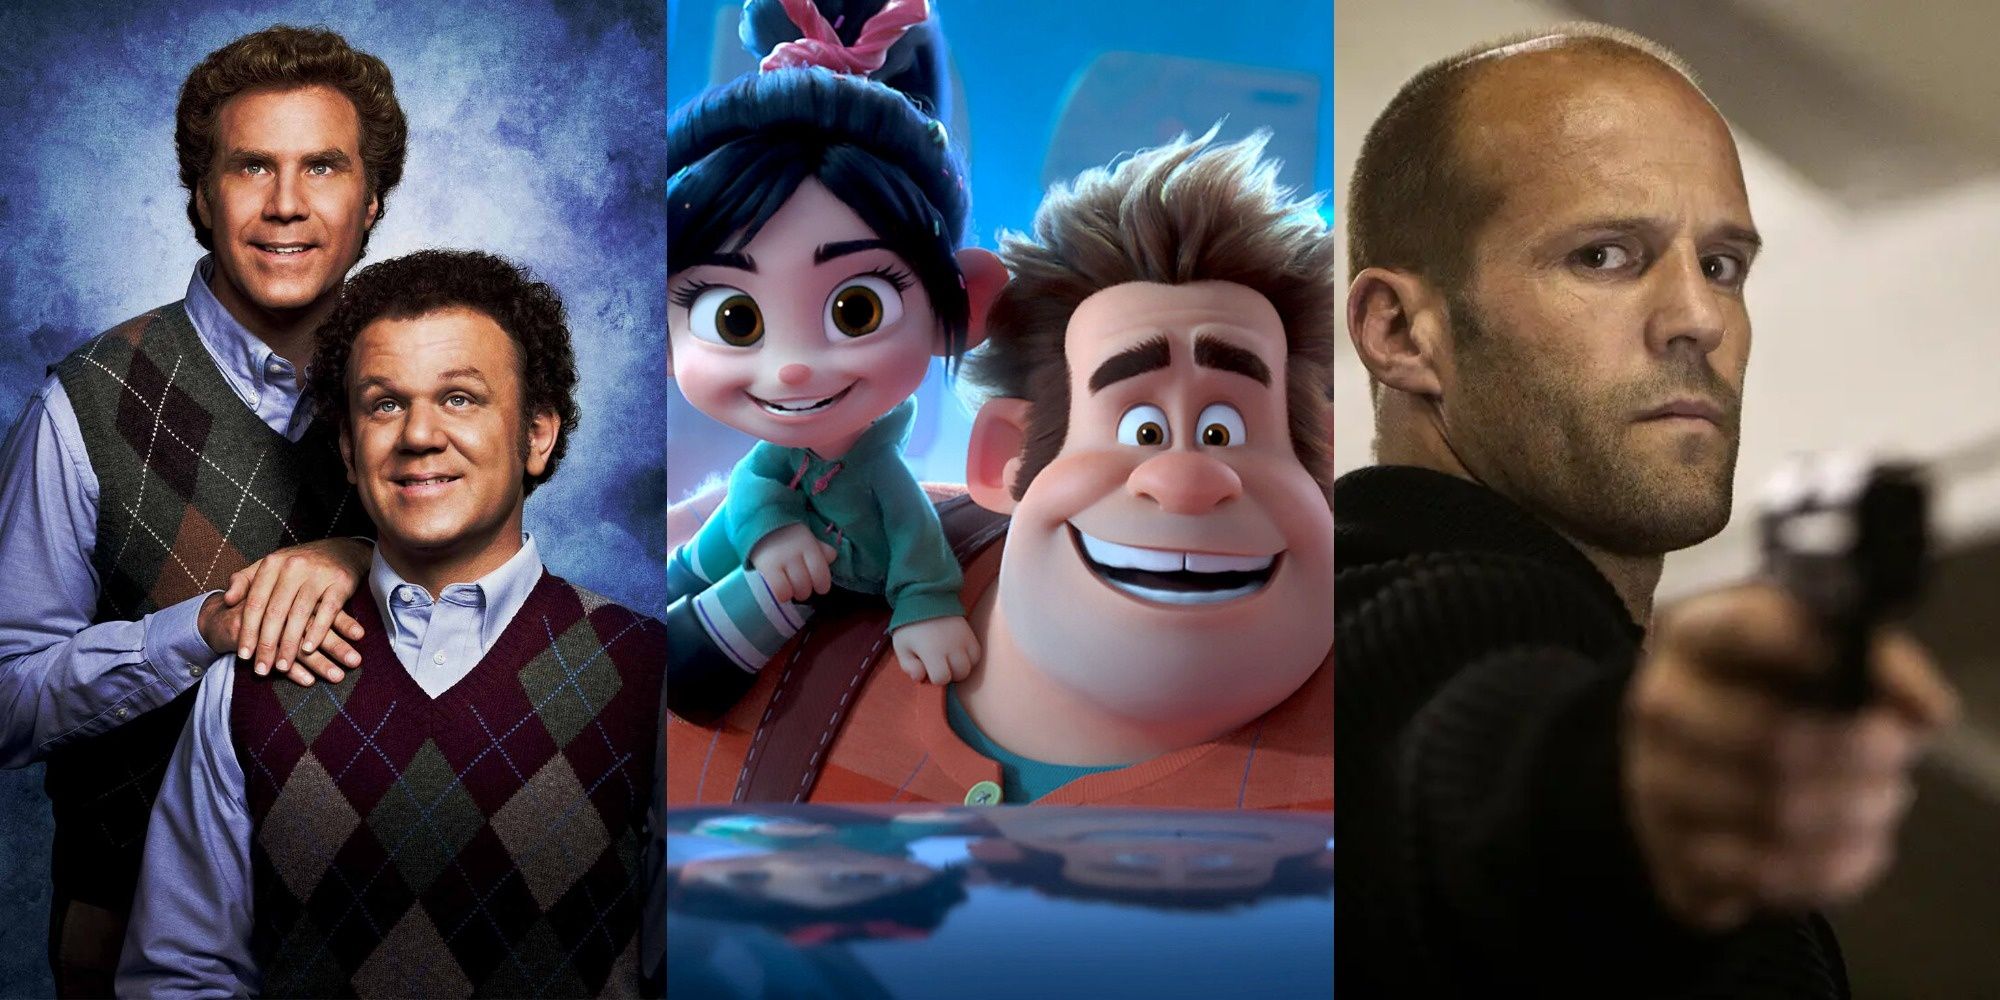 Will Ferrell and John C. Reilly in Step Brothers, Ralph and Vanellope from Ralph Breaks the Internet, and Jason Statham in Fast and the Furious